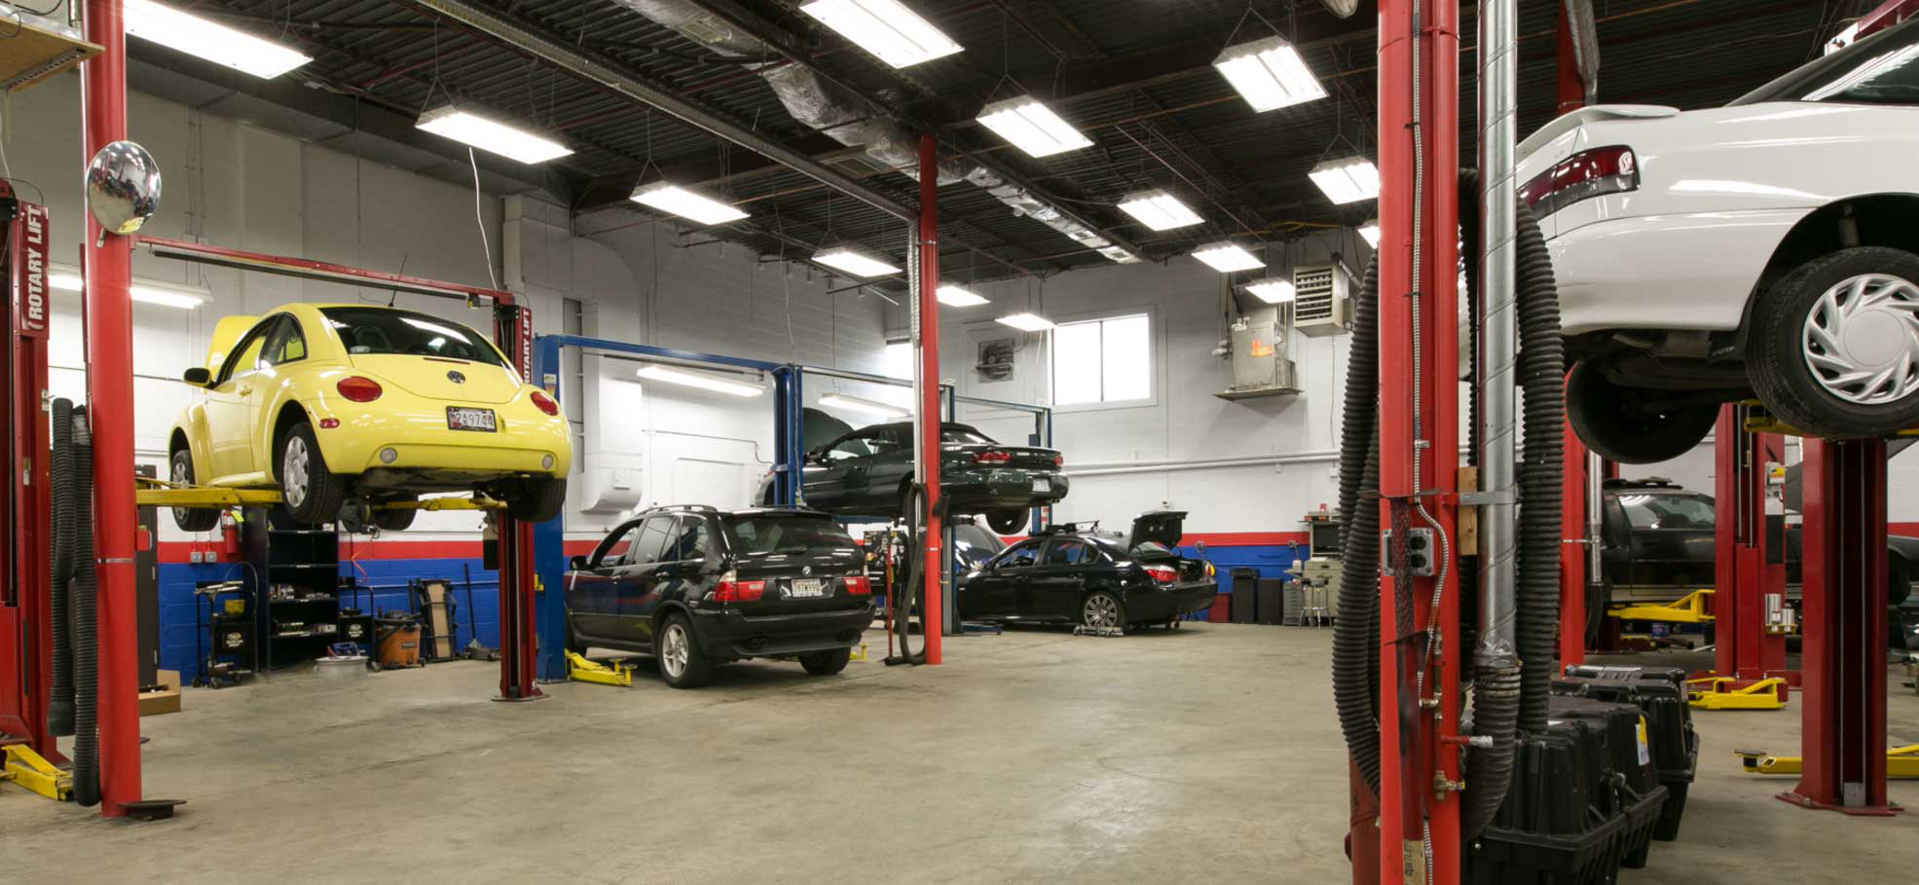 How to Choose Auto Repair Shops Near Me in Vista - Golden Wrench Automotive